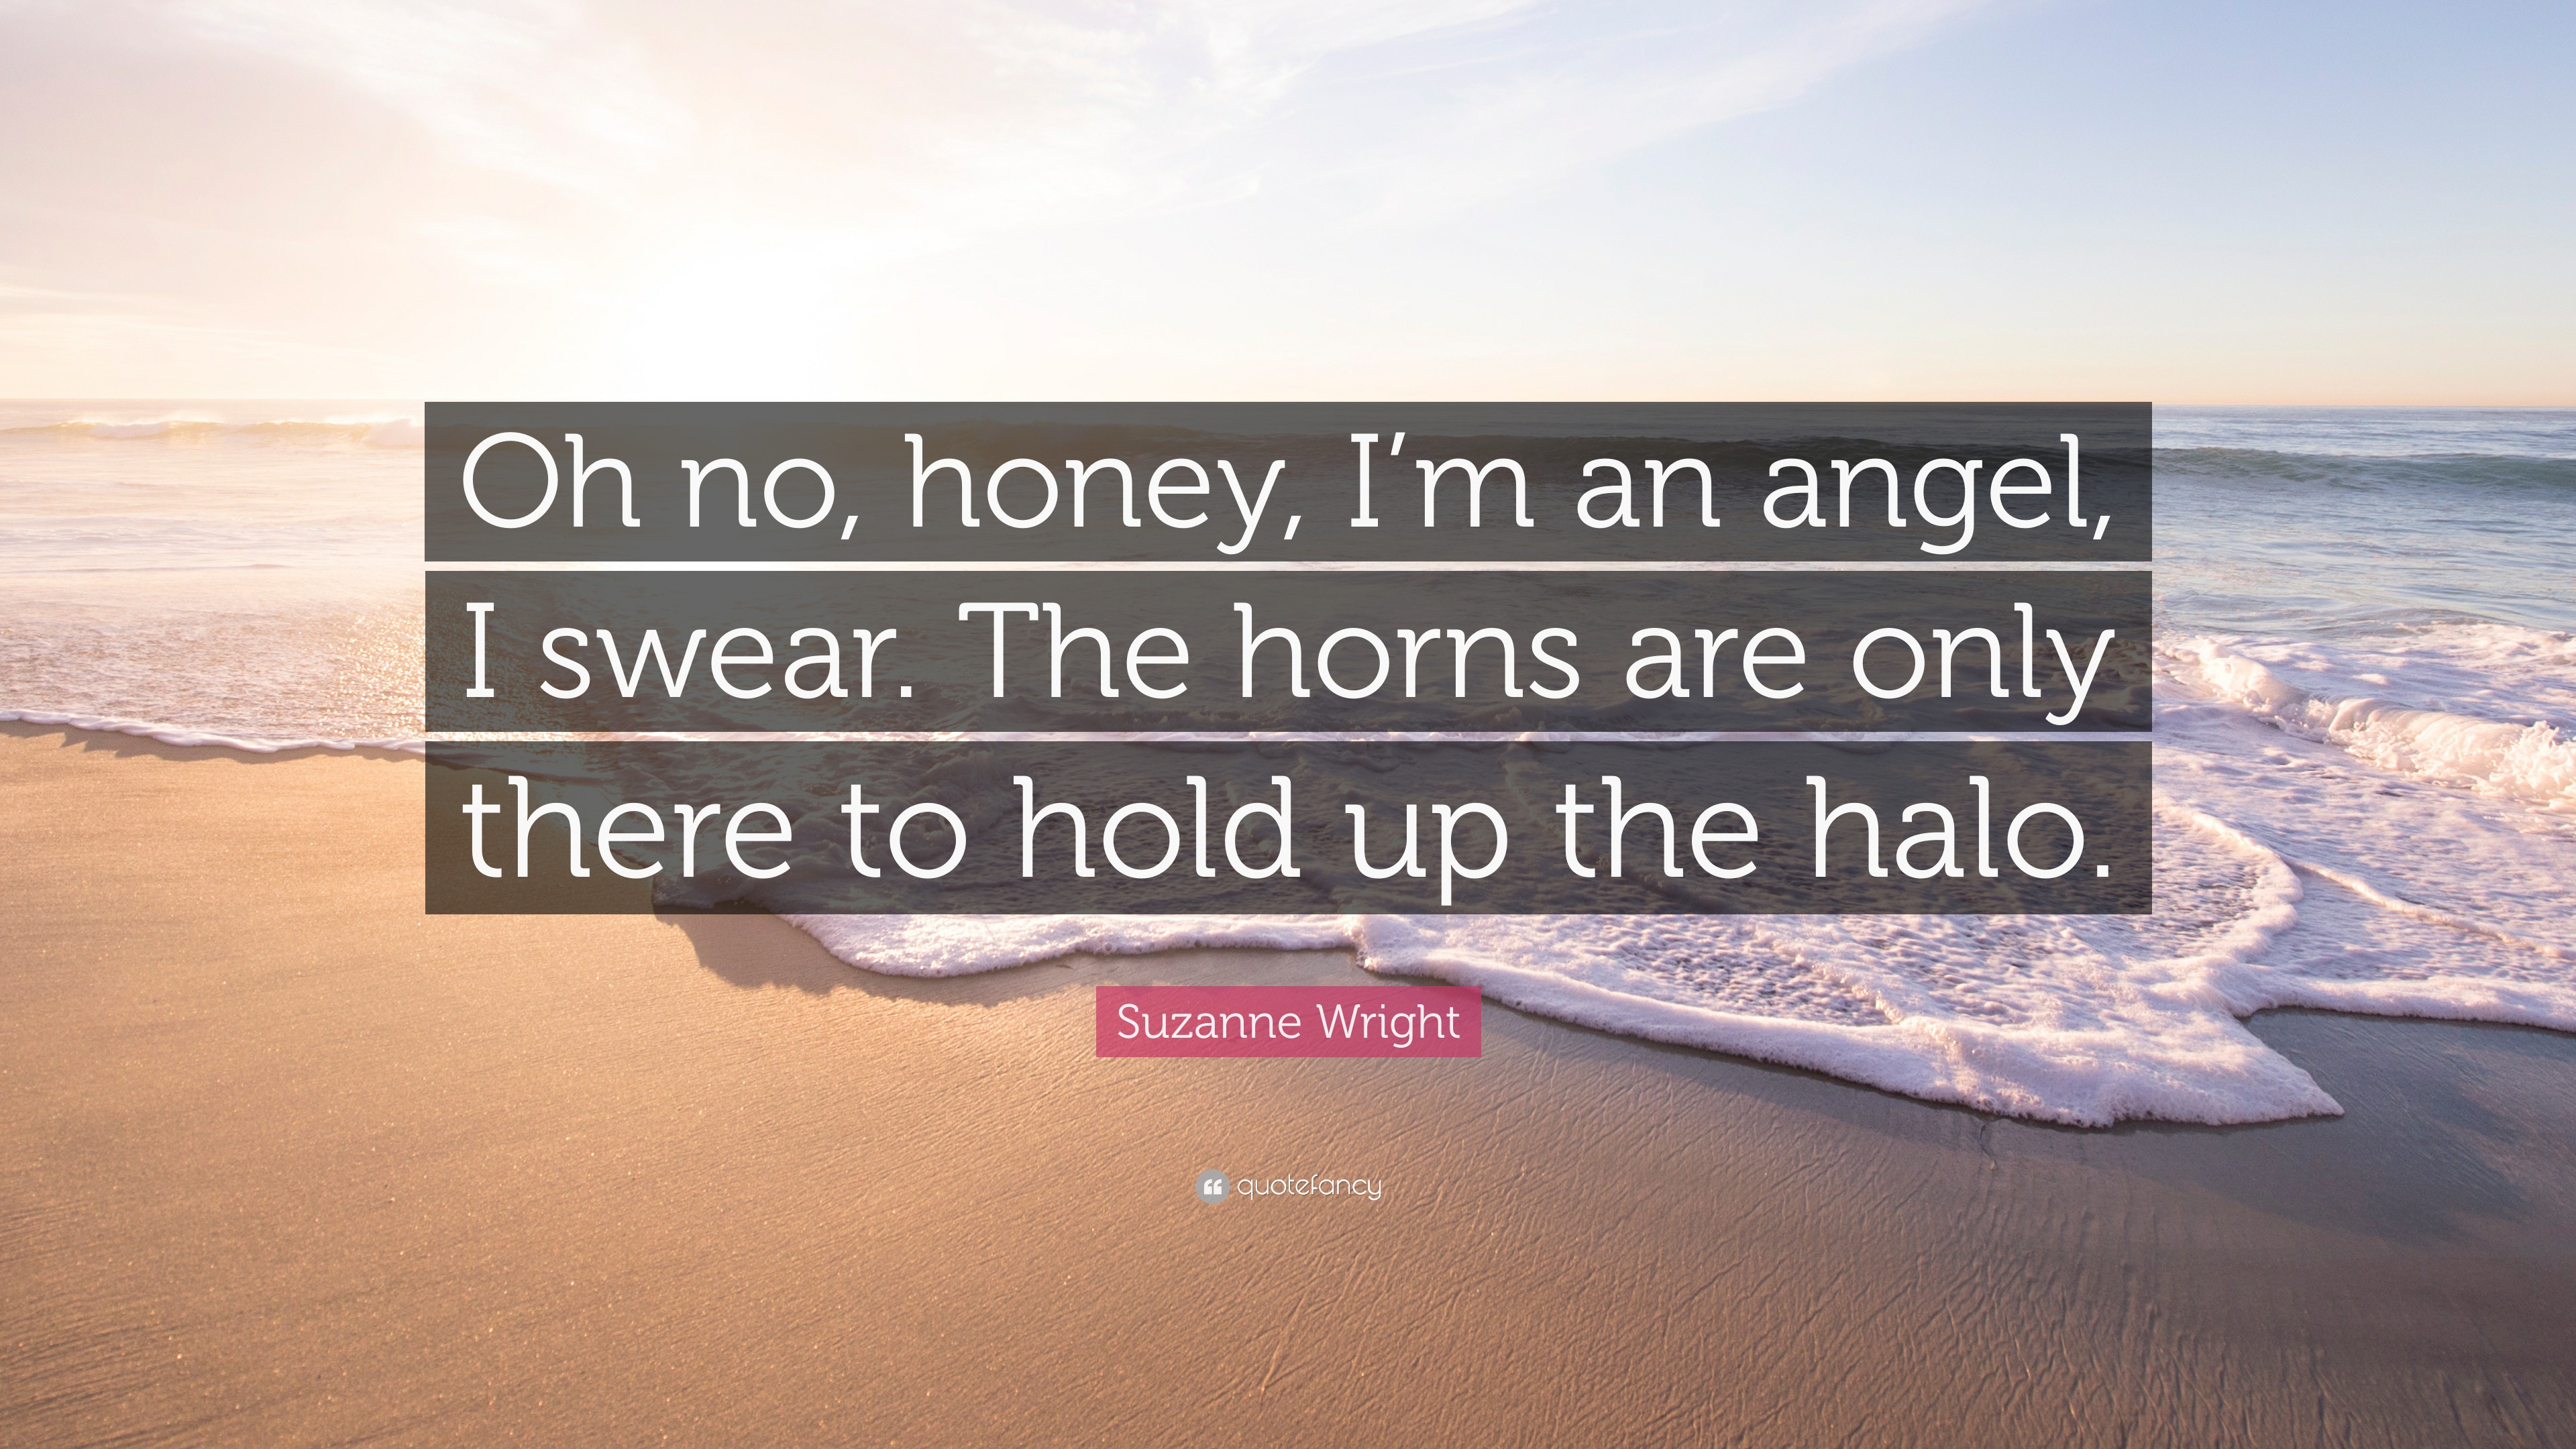 Suzanne Wright Quote: “Oh no, honey, I'm an angel, I swear. The